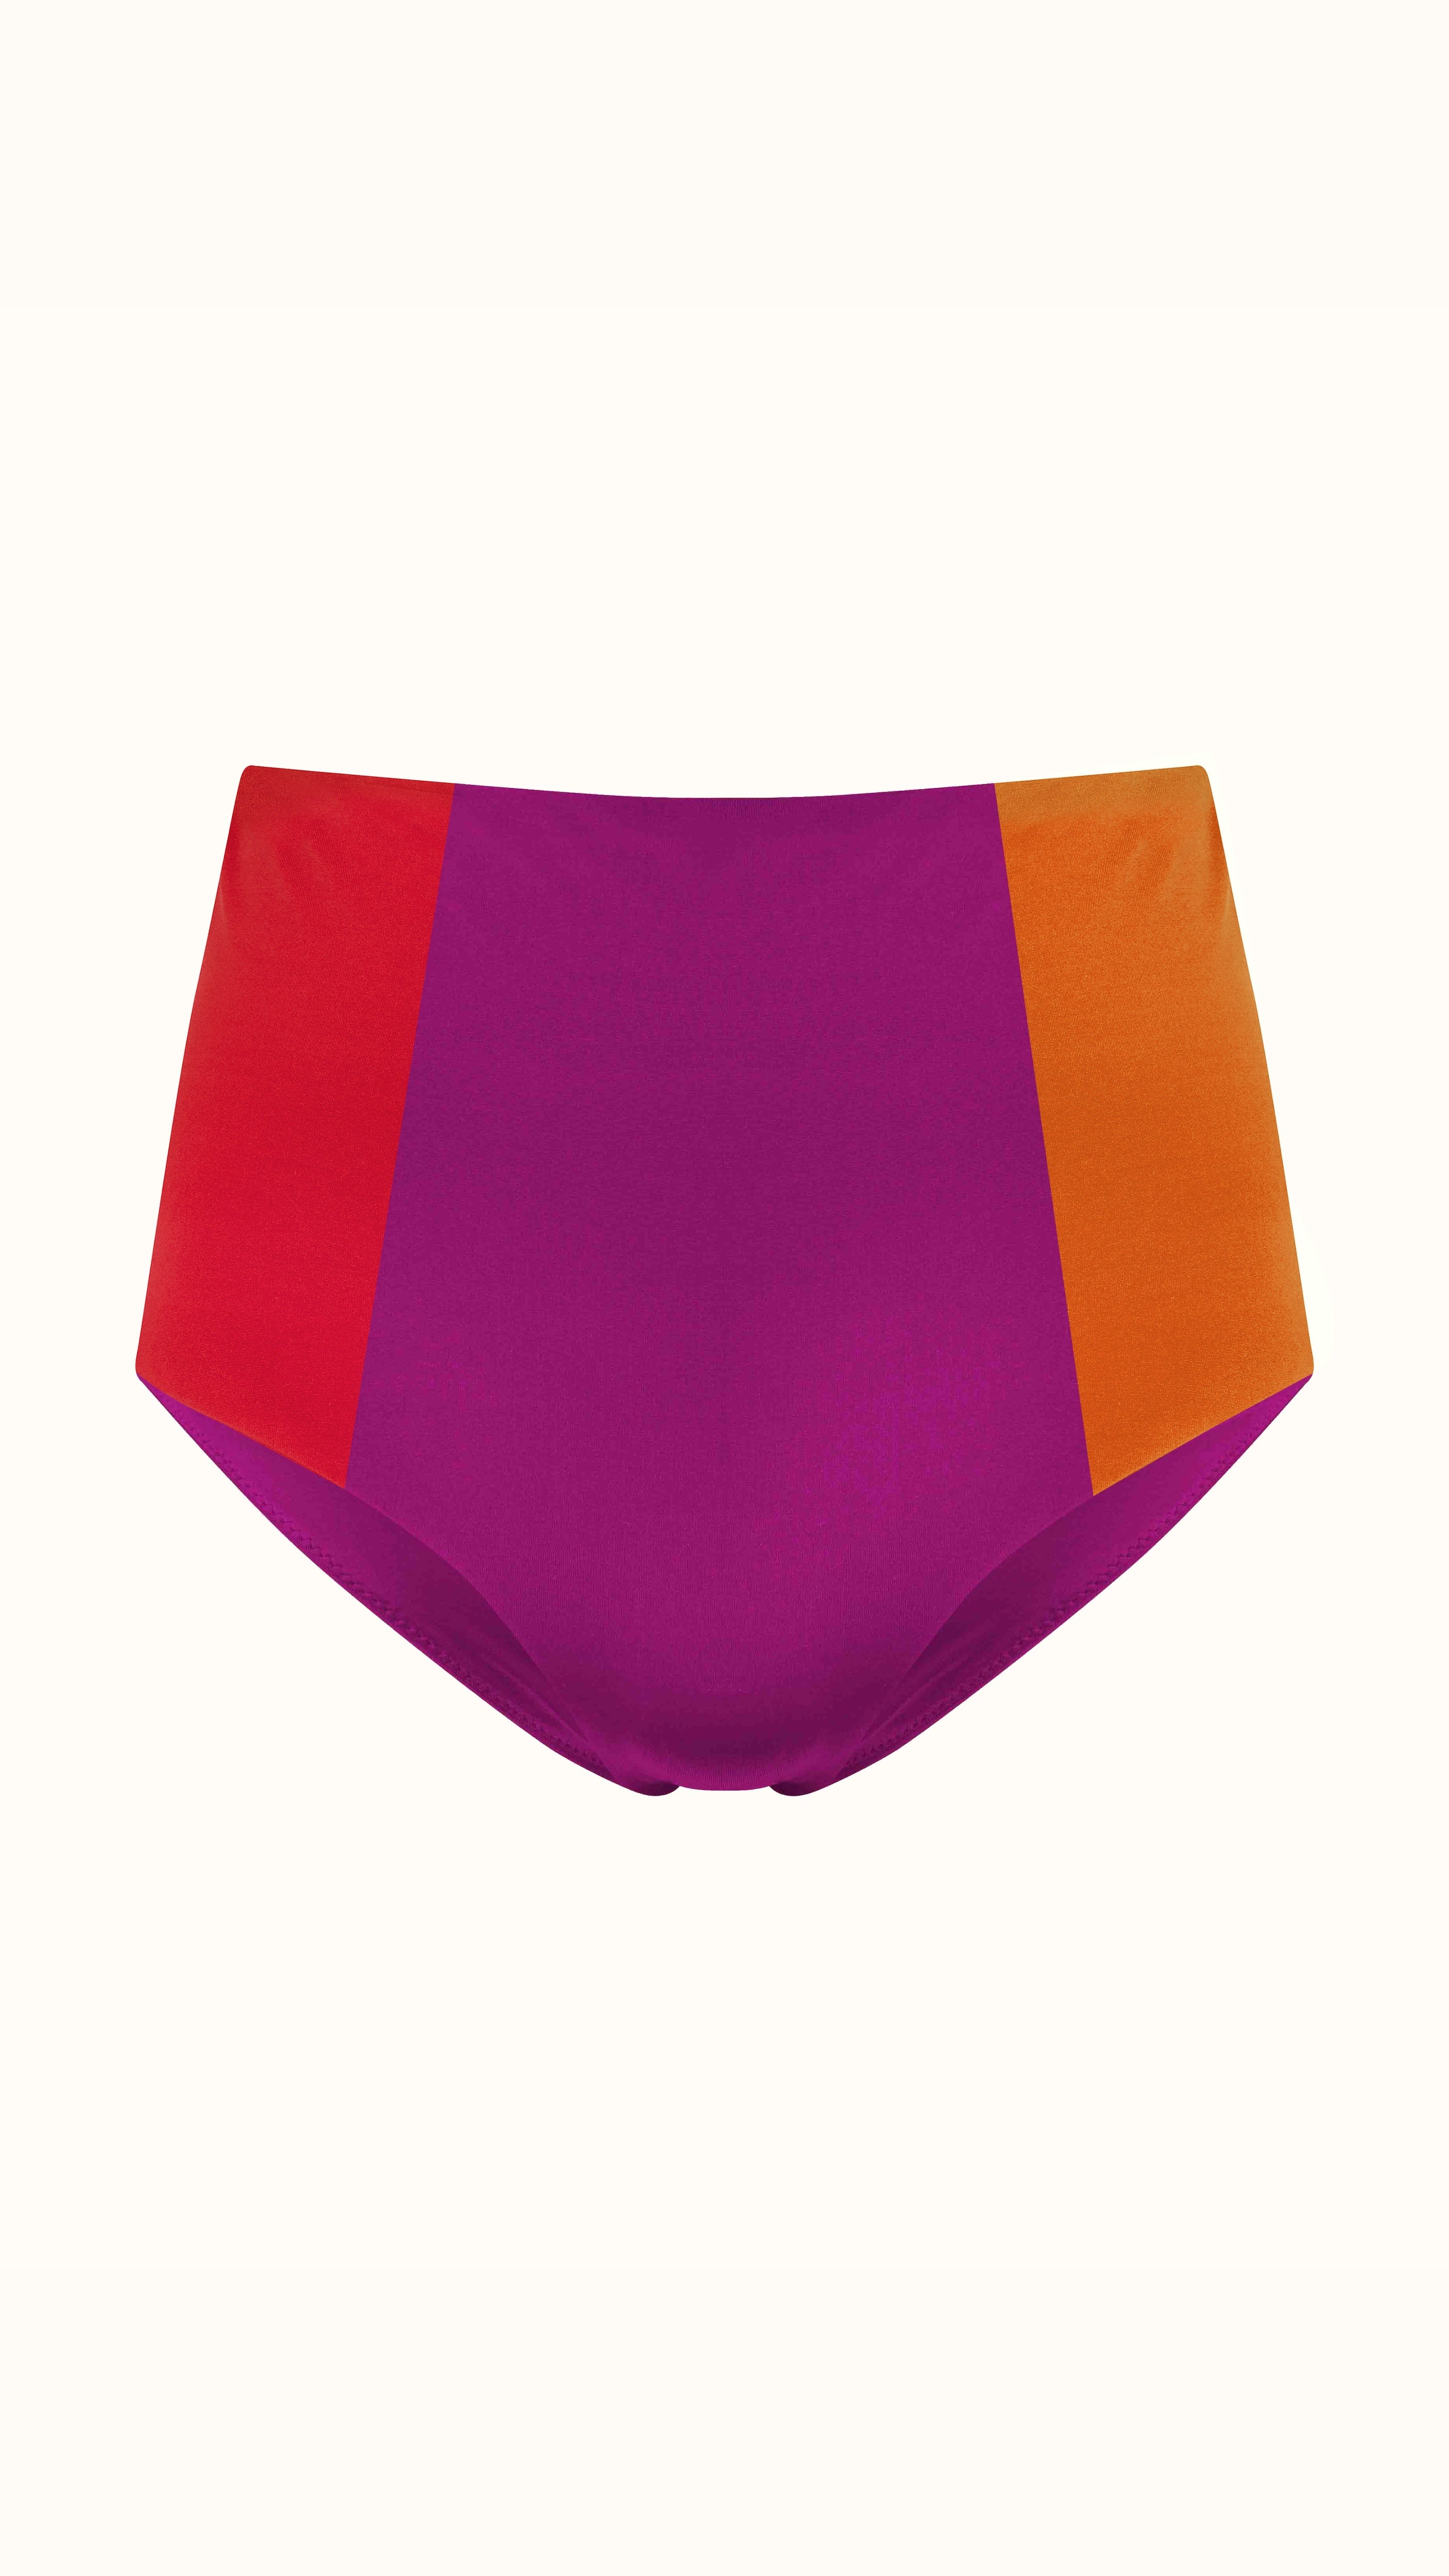 Talia Collins The High Wasited Brief in Red, plum and orange. Sustainable swimwear made from recycled materials. Three color block panels in retro high waist style. Full coverage bikini bathing suit bottoms. Experience 27 Madrid. Product photo front view.